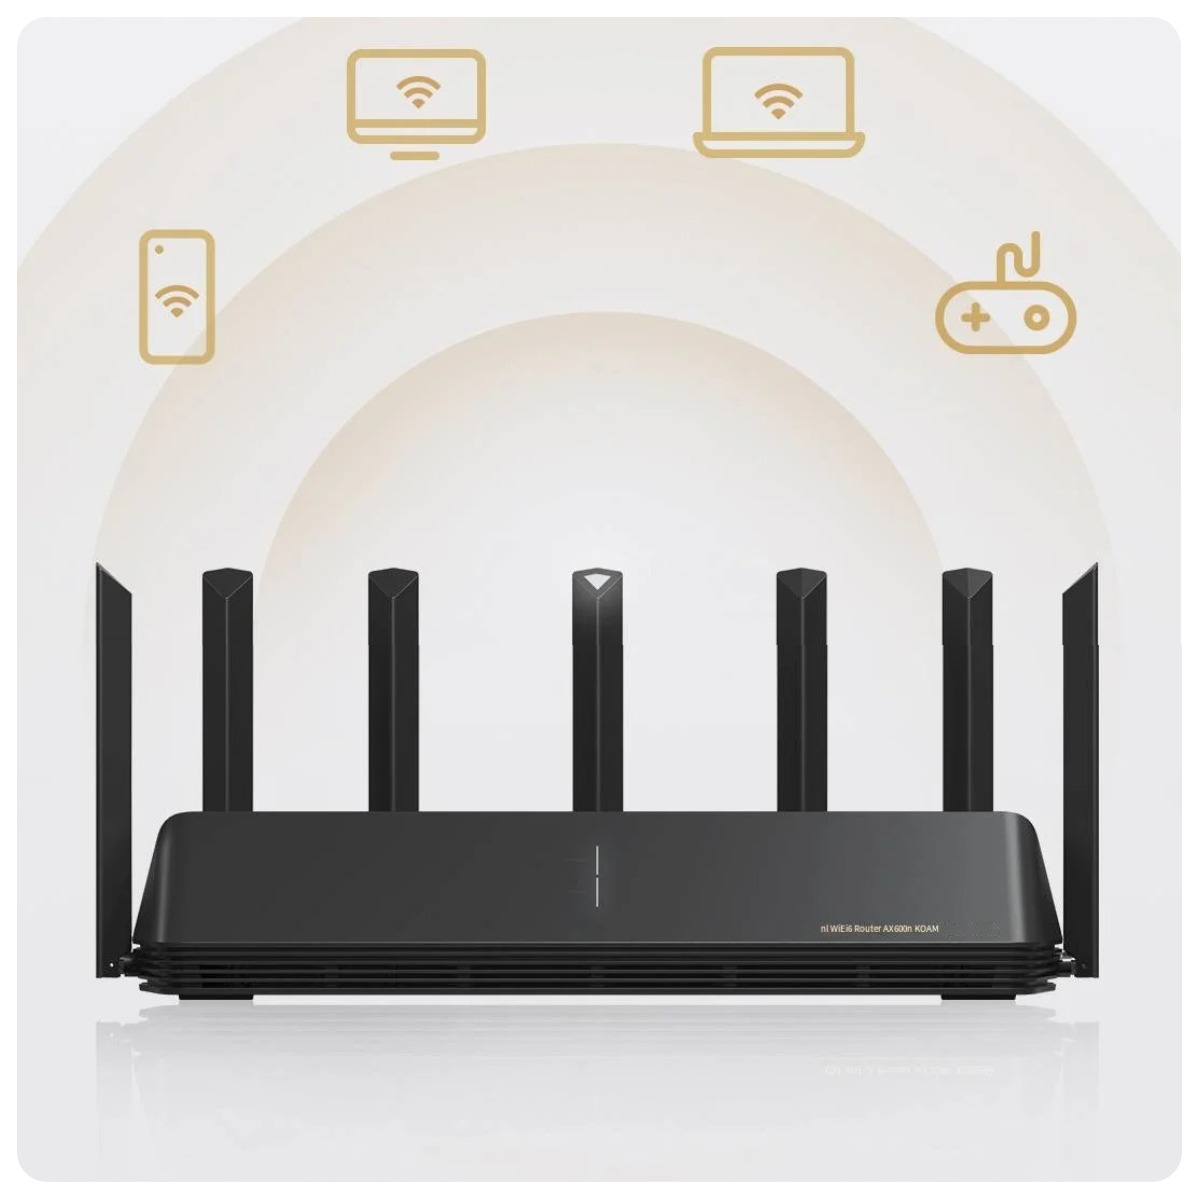 Mijia-Router-AX6000-03